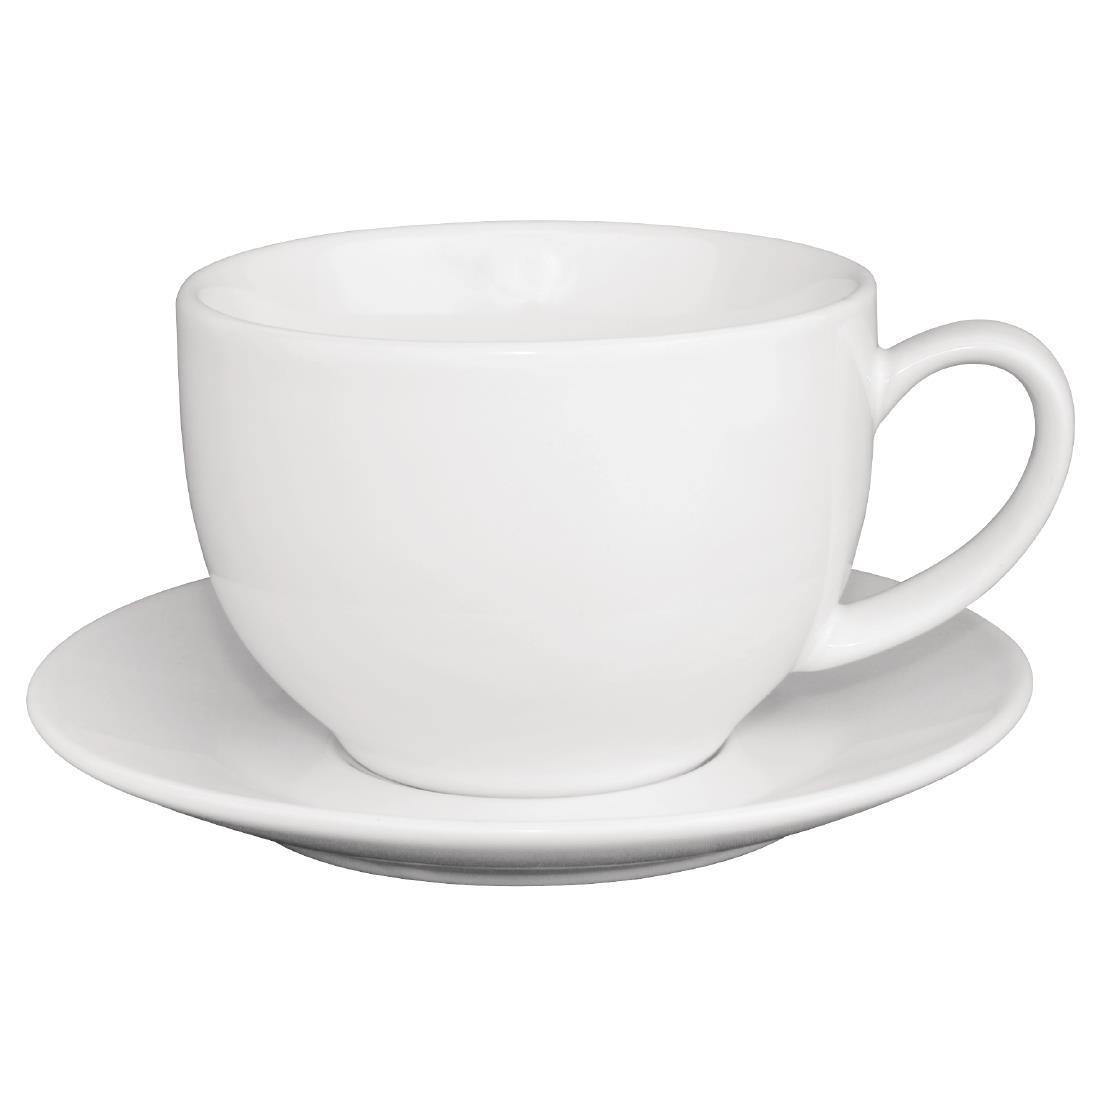 Olympia Cafe Cappuccino Cups White 340ml (Pack of 12) - GK077  - 3